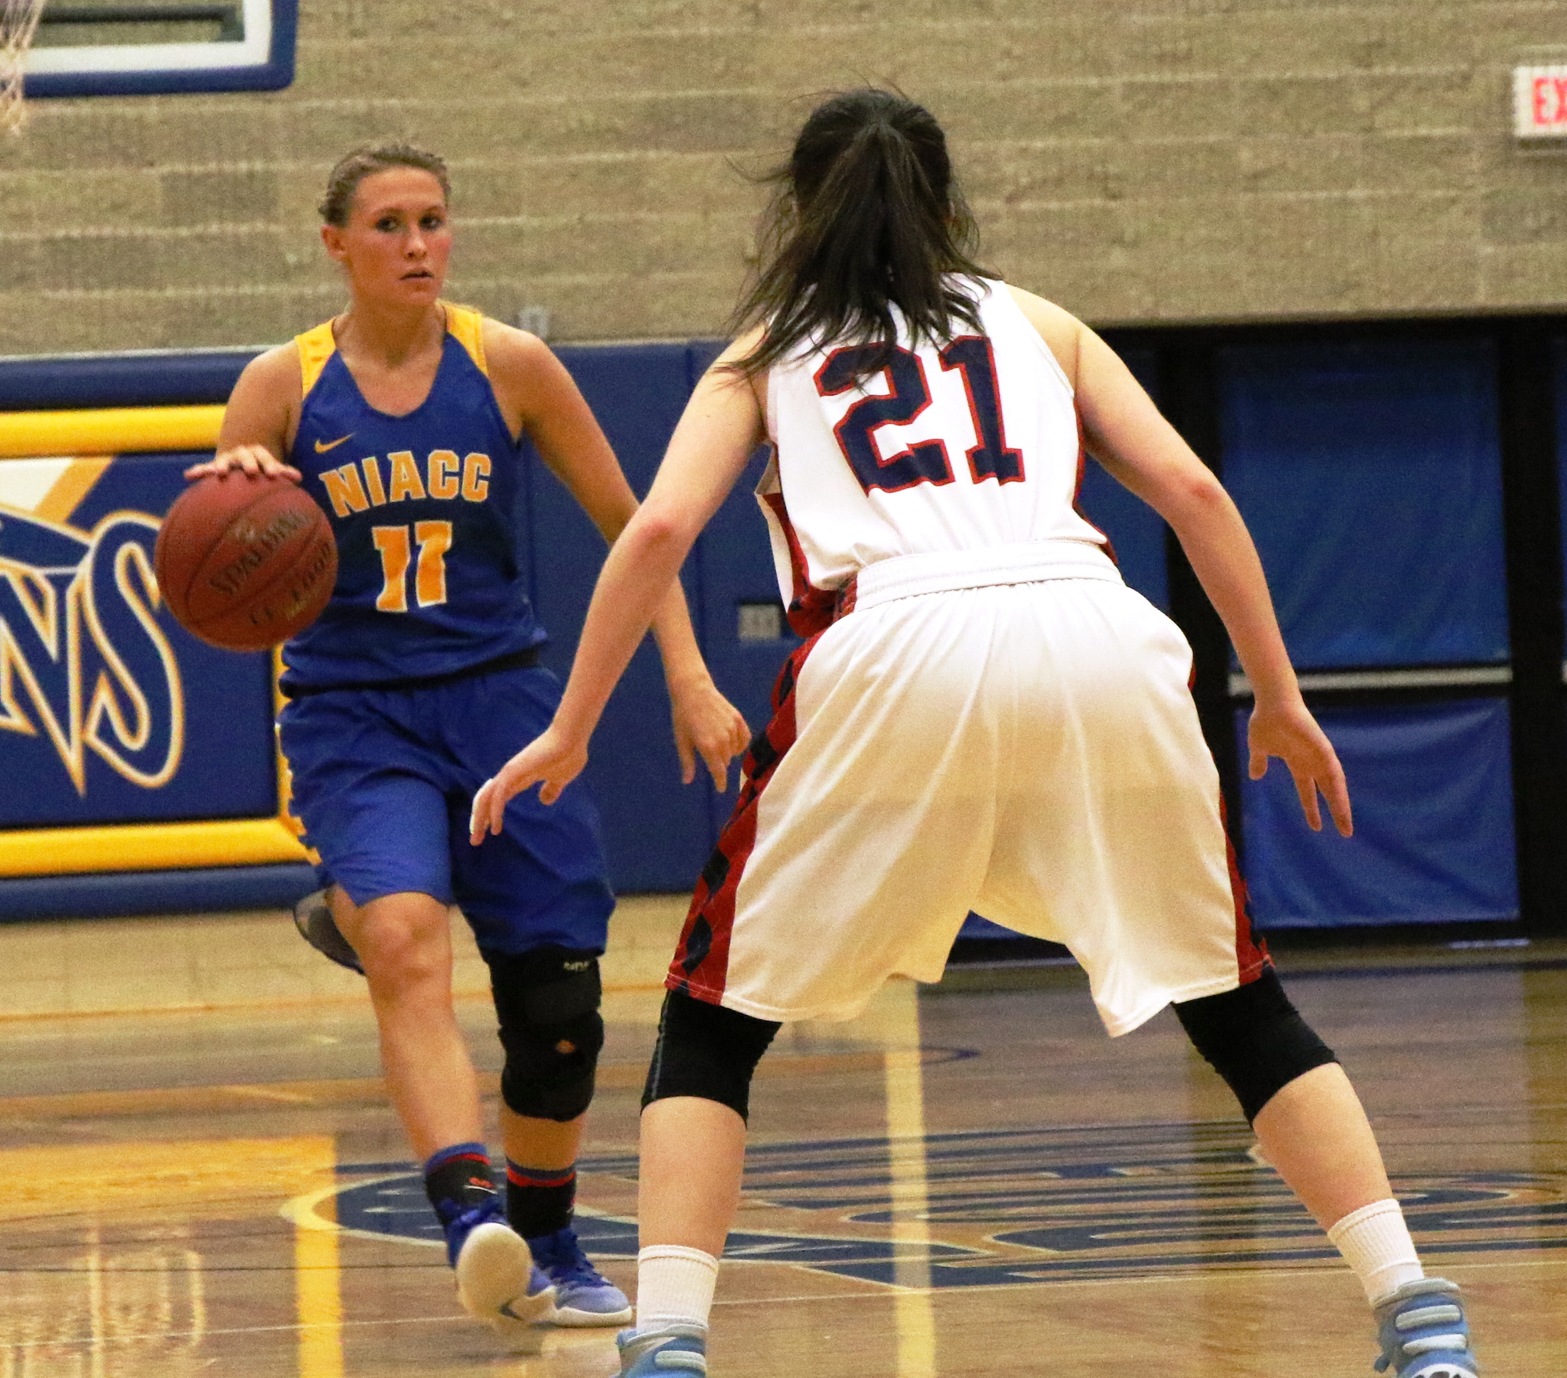 NIACC's Courtney Larson brings the ball up the court in Saturday's game against Southwestern. Photo by NIACC's Jim Zach.